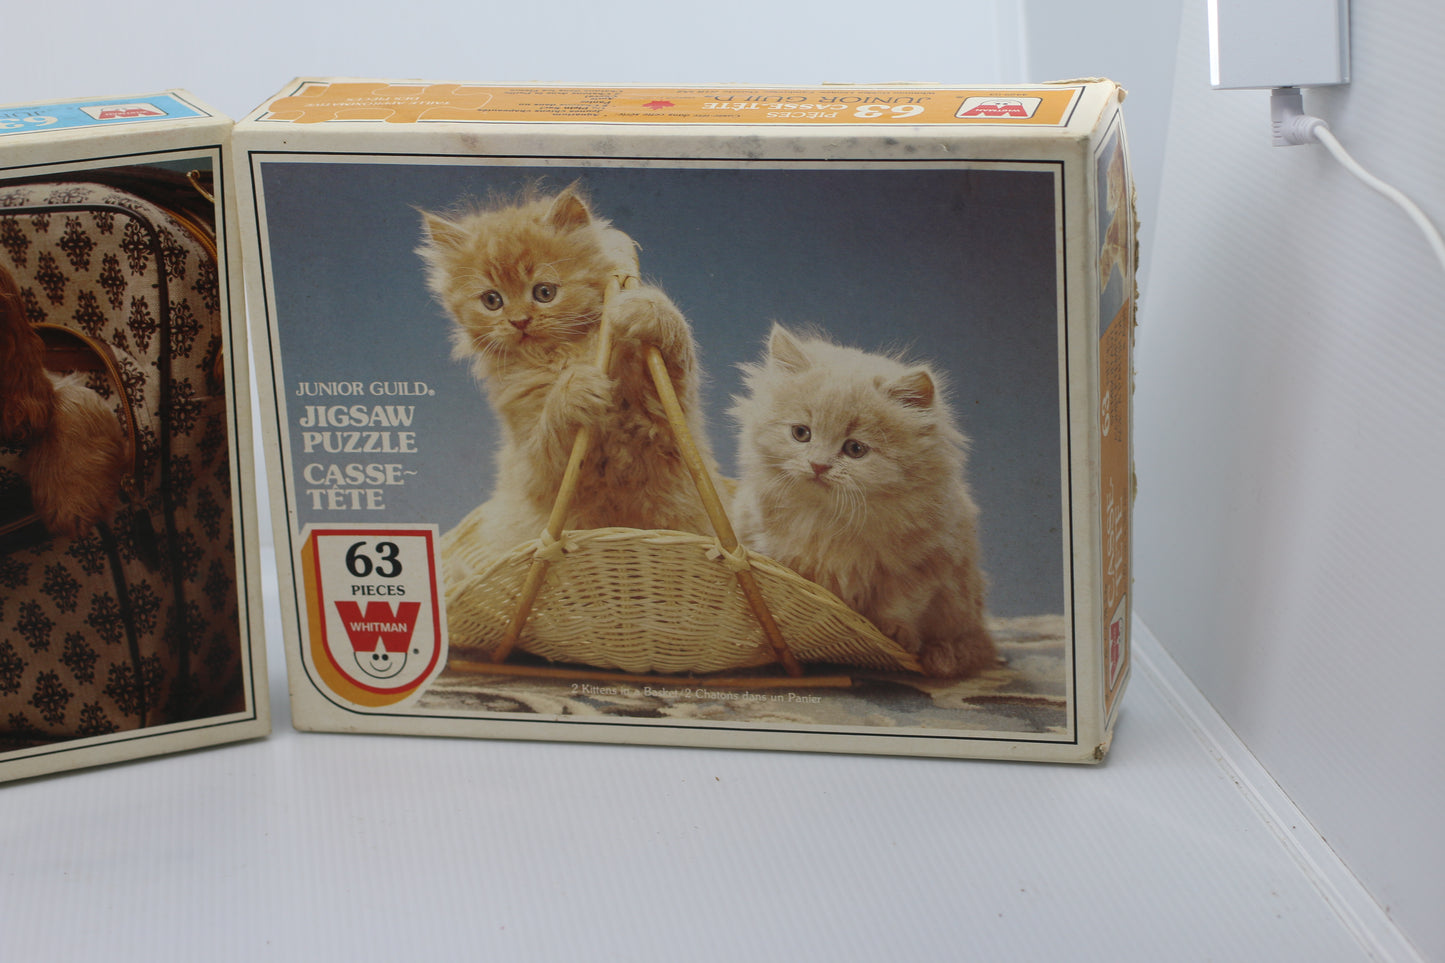 junior guild jigsaw puzzle 63 pieces whitman dogs & cats in box